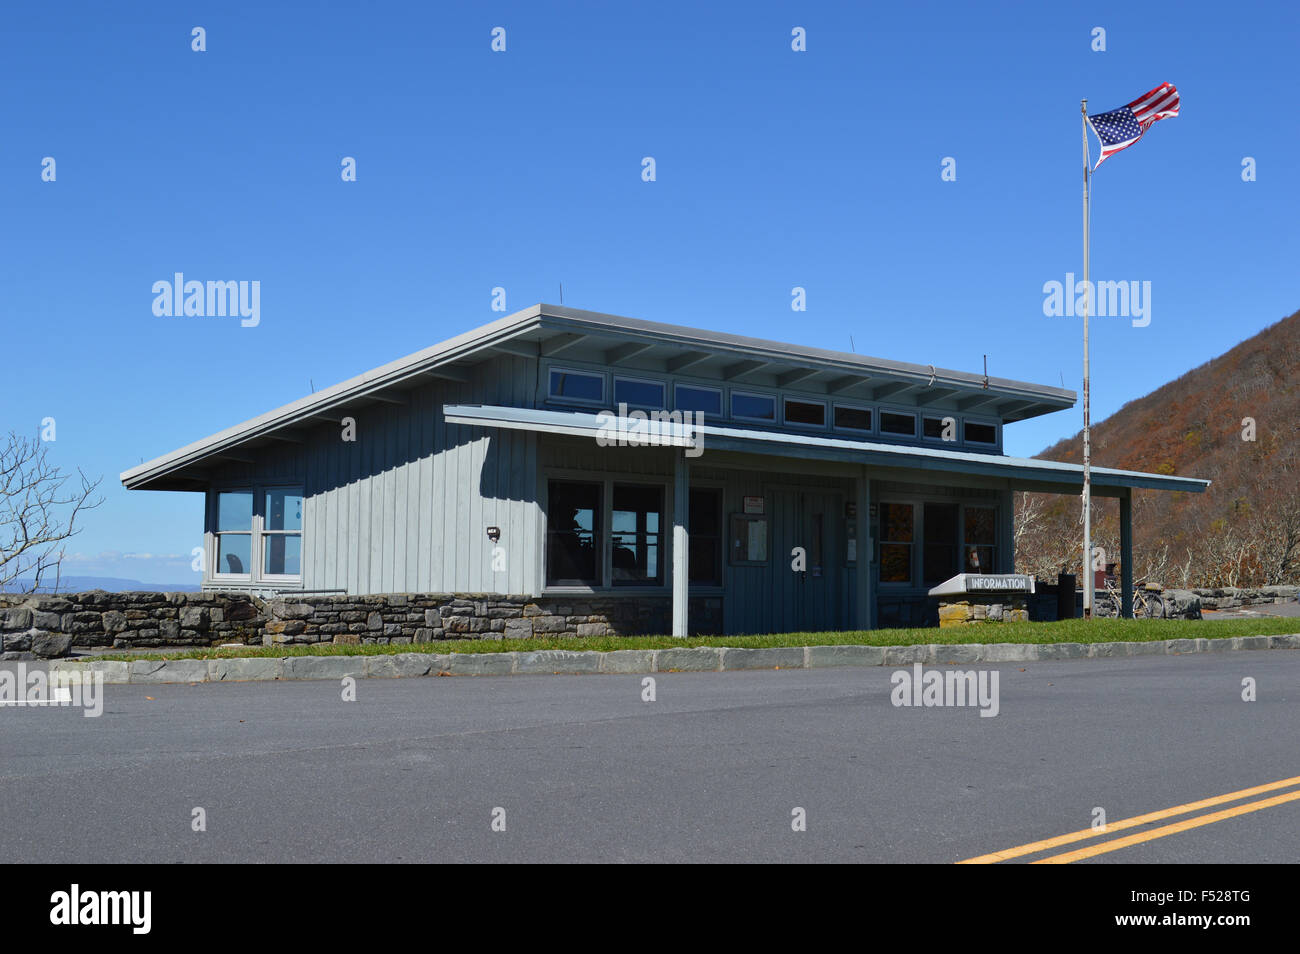 The Craggy Gardens Visitor Center located on the Blue Ridge Parkway in North Carolina. Stock Photo